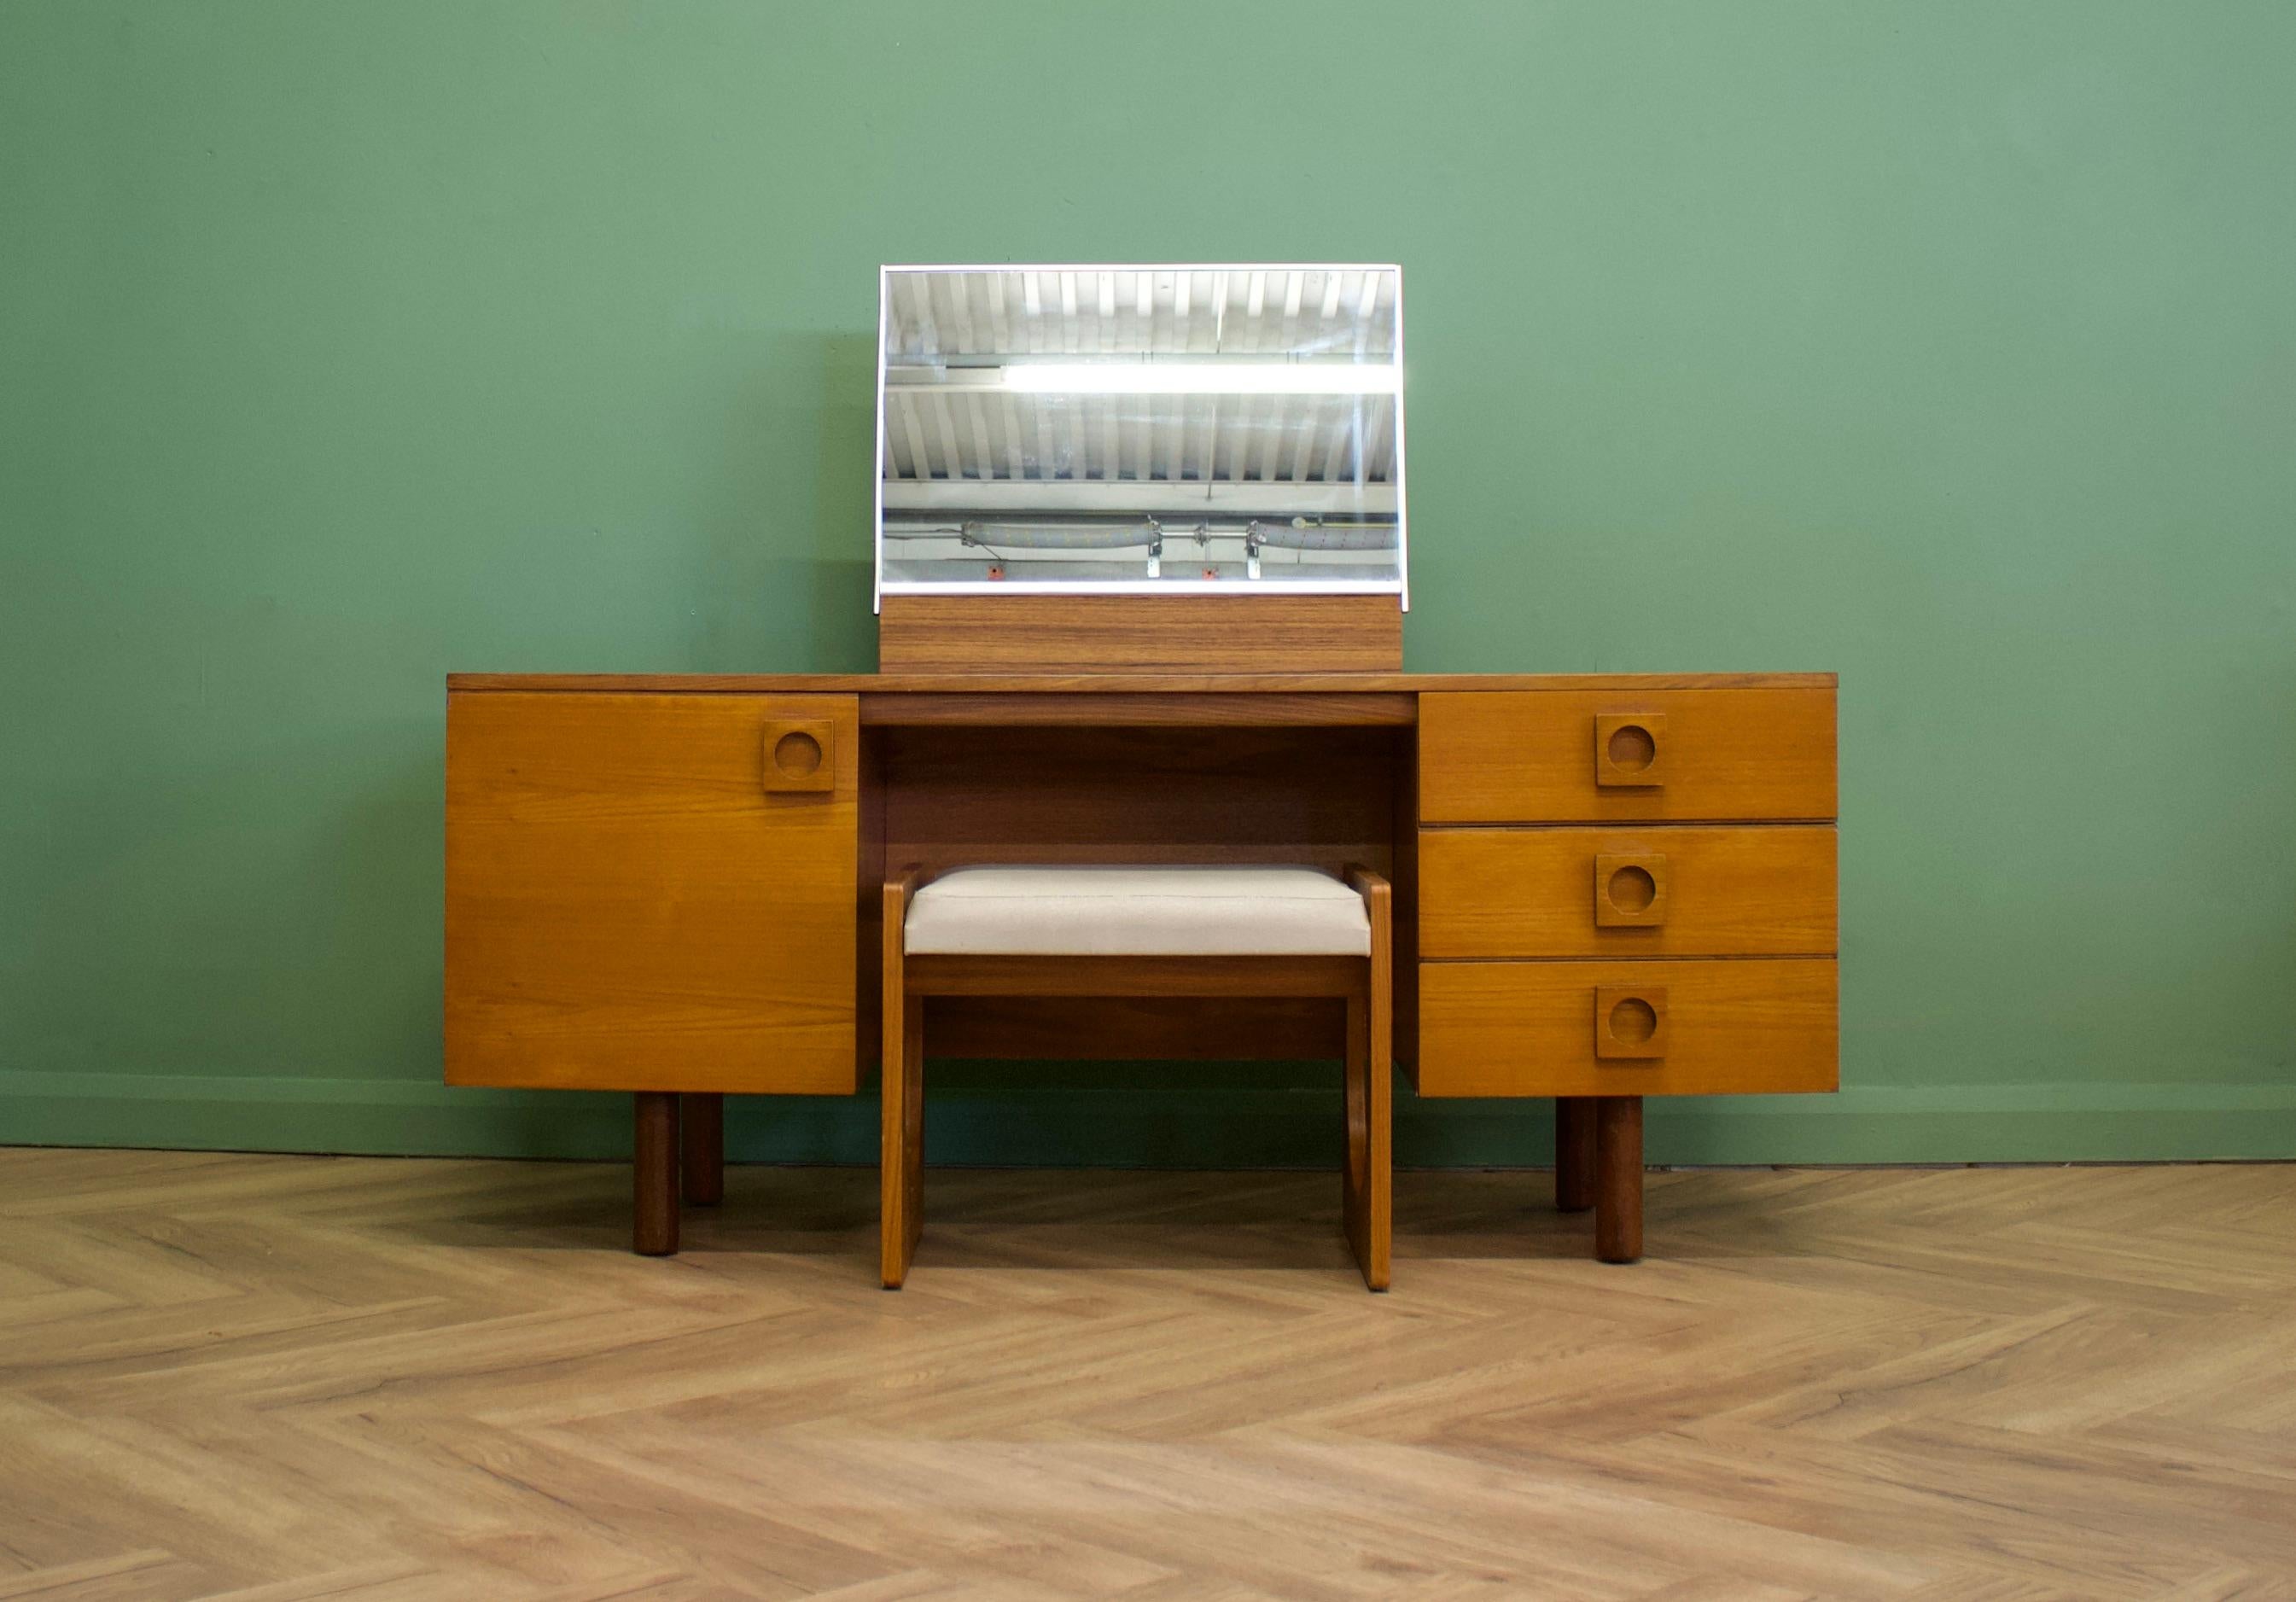 A midcentury teak dressing table & stool - from Uniflex

Made in the UK
There is one central mirror to this piece, a bank of three drawers and a cupboard, with an internal shelf - this shelf is fixed
The handles are made from solid teak, and